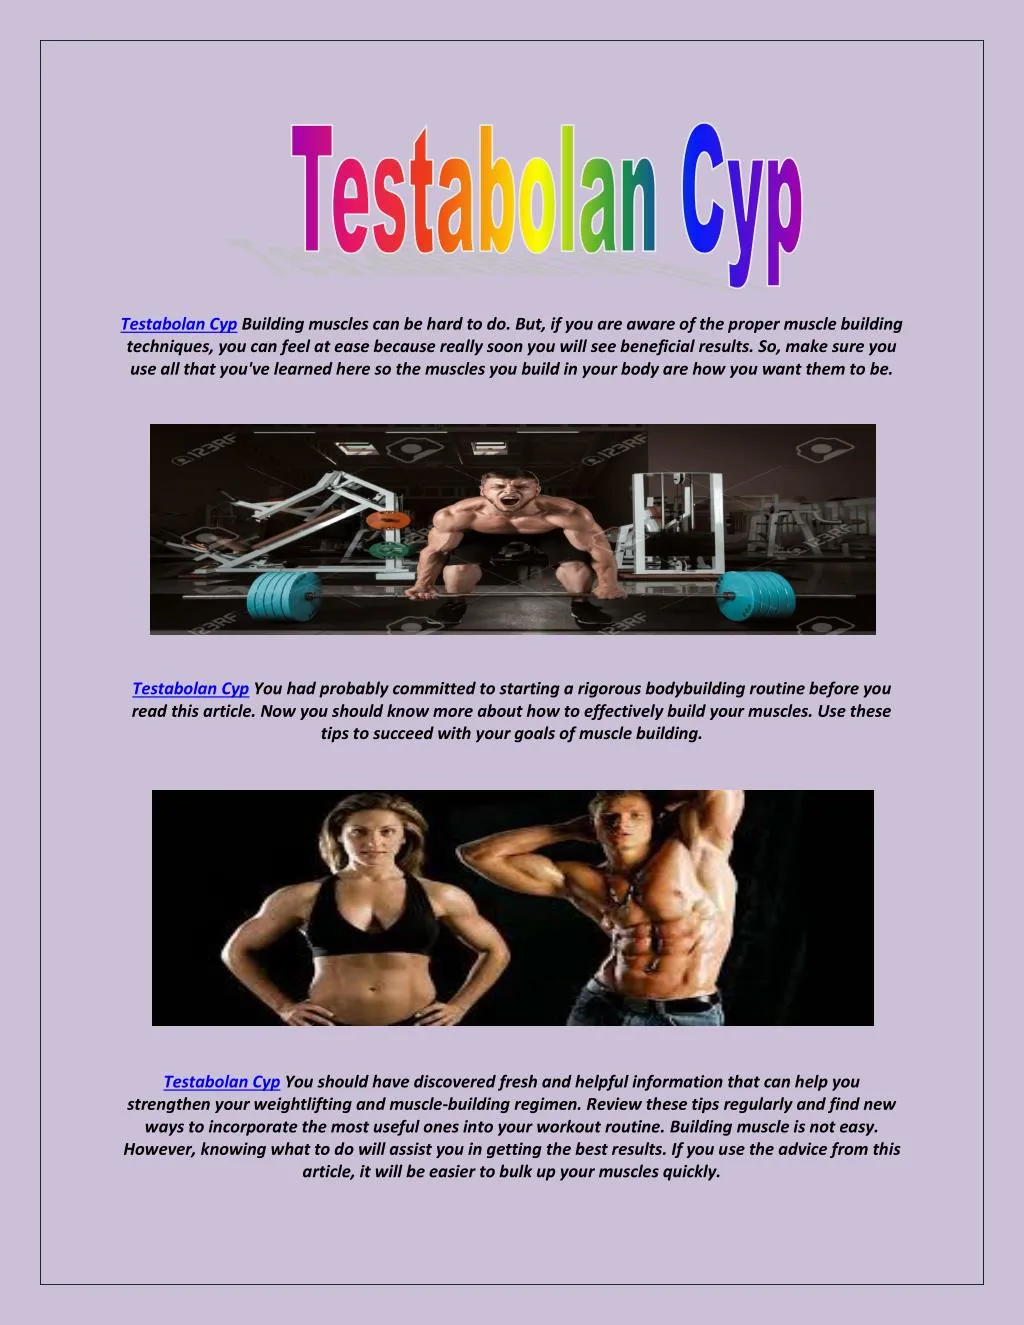 testabolan cyp building muscles can be hard